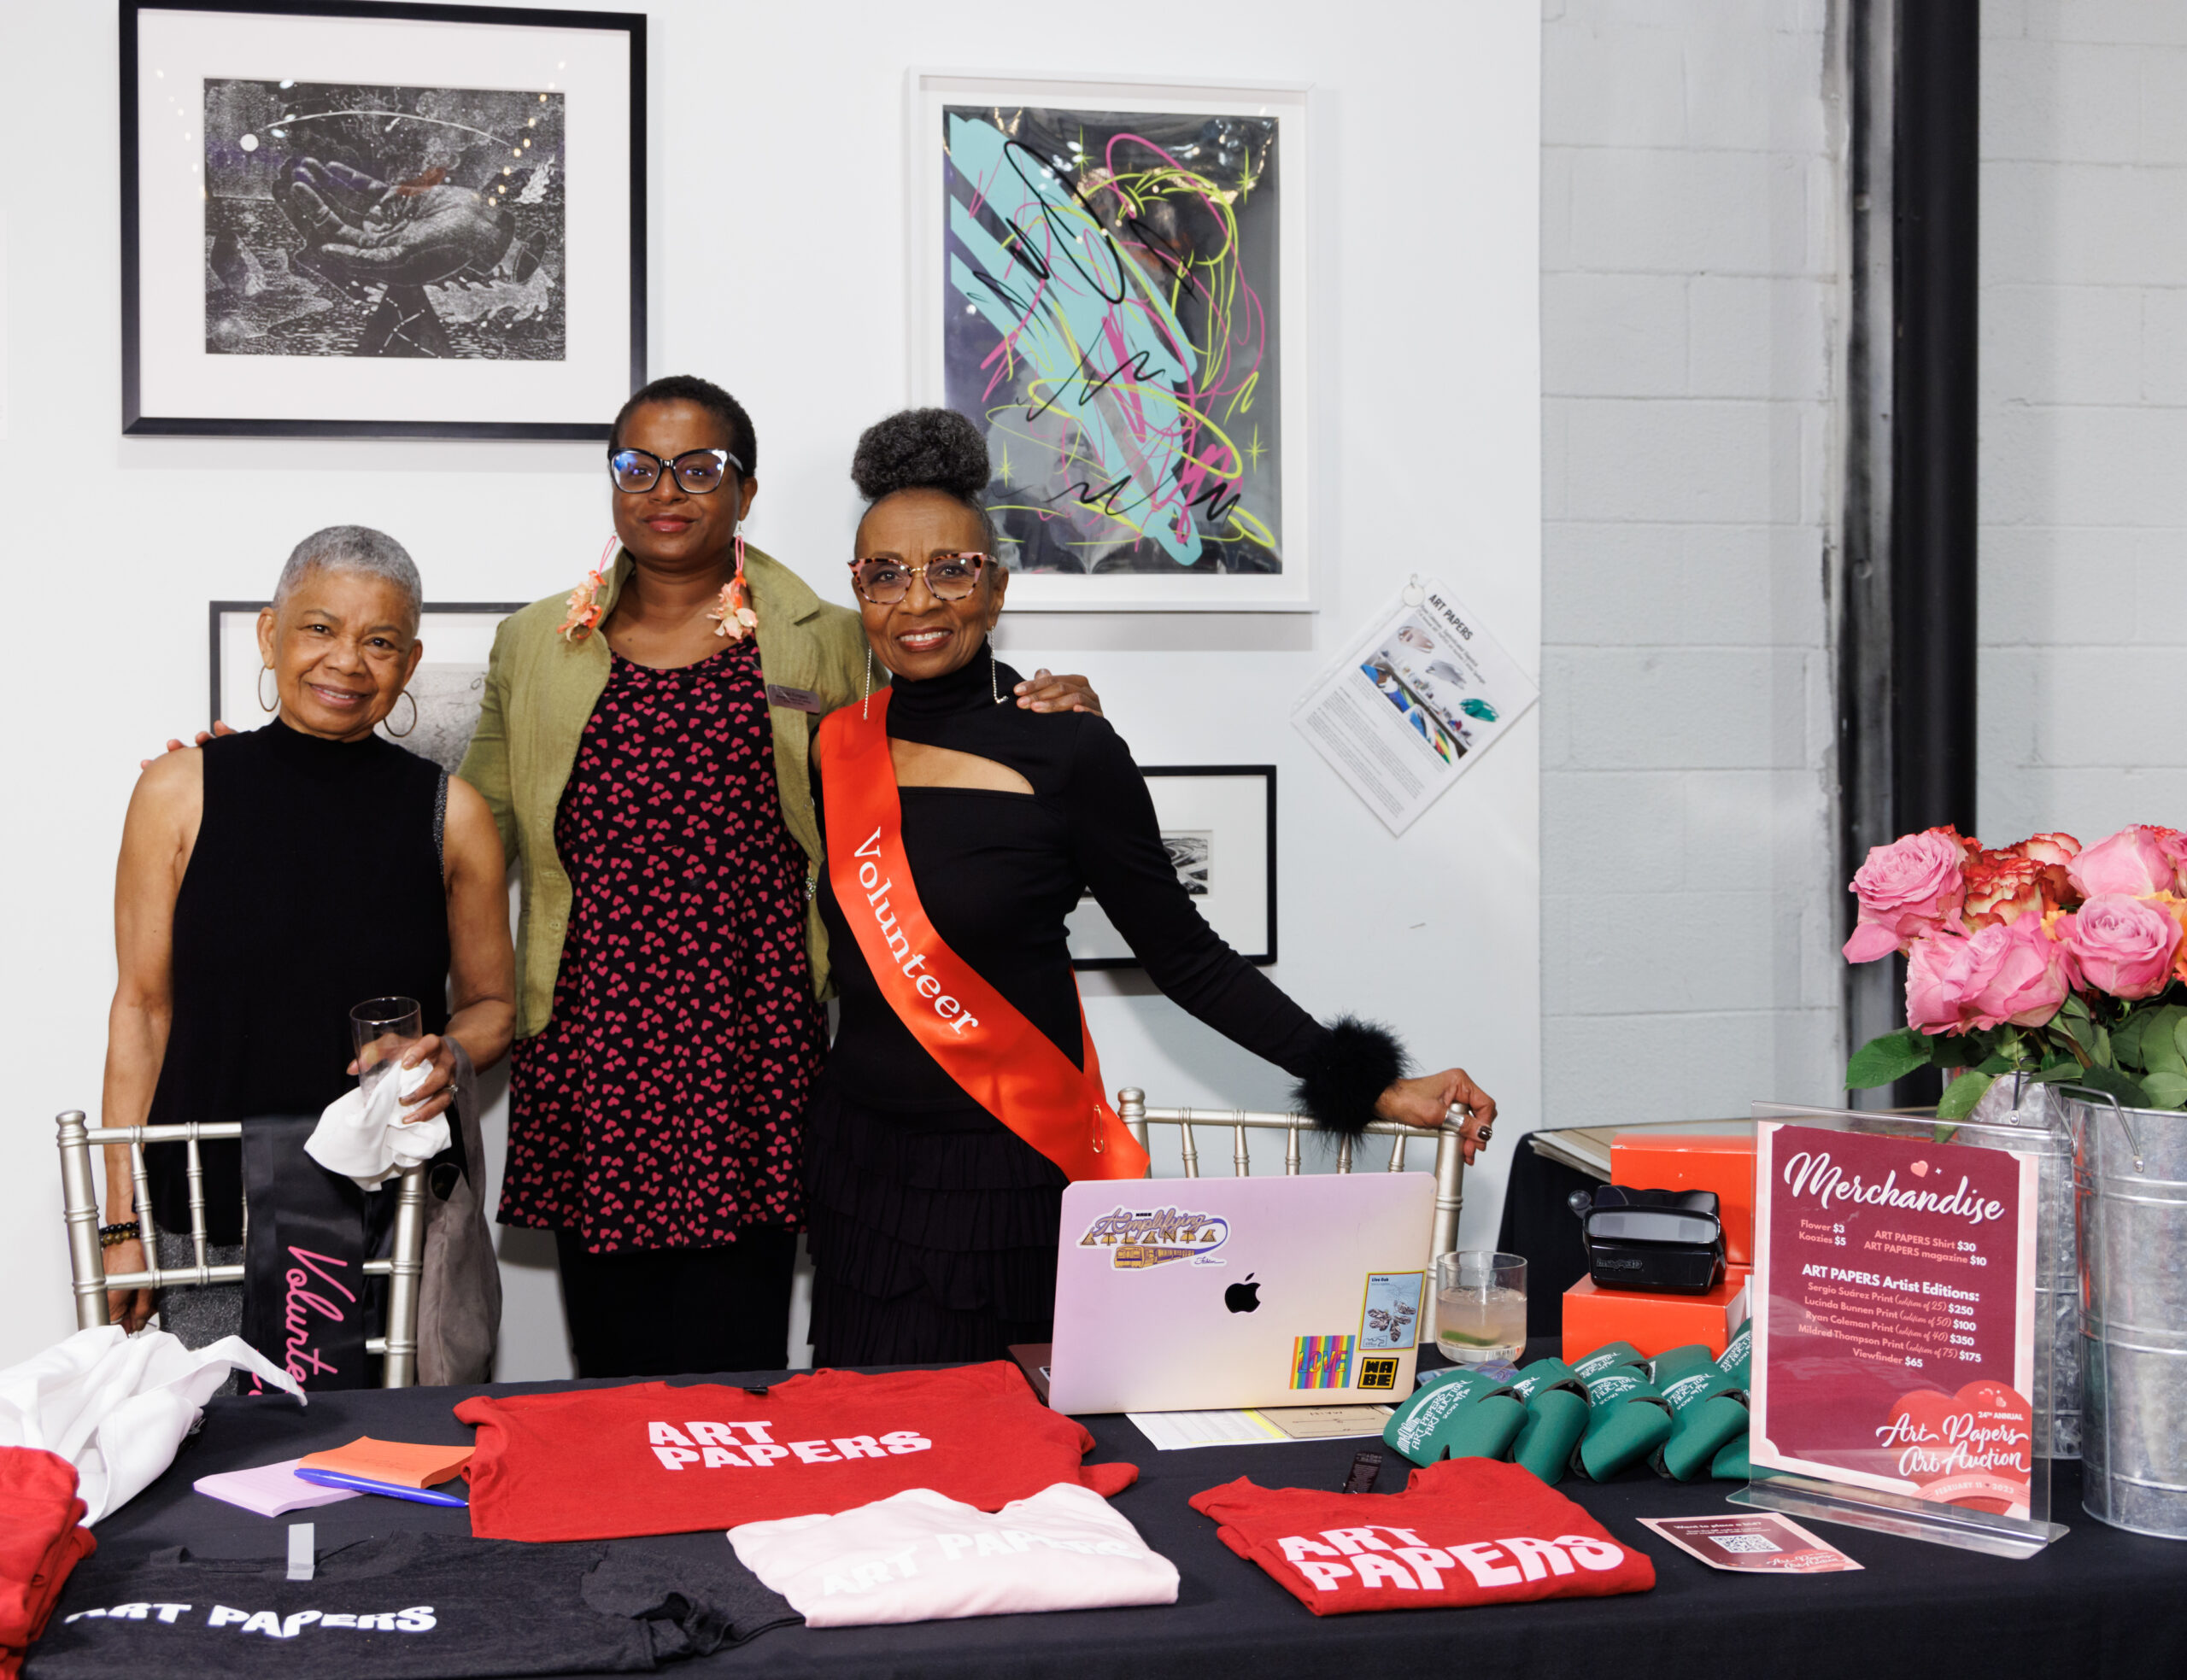 Image of three women posing behind a black table with Art Papers merchandise.